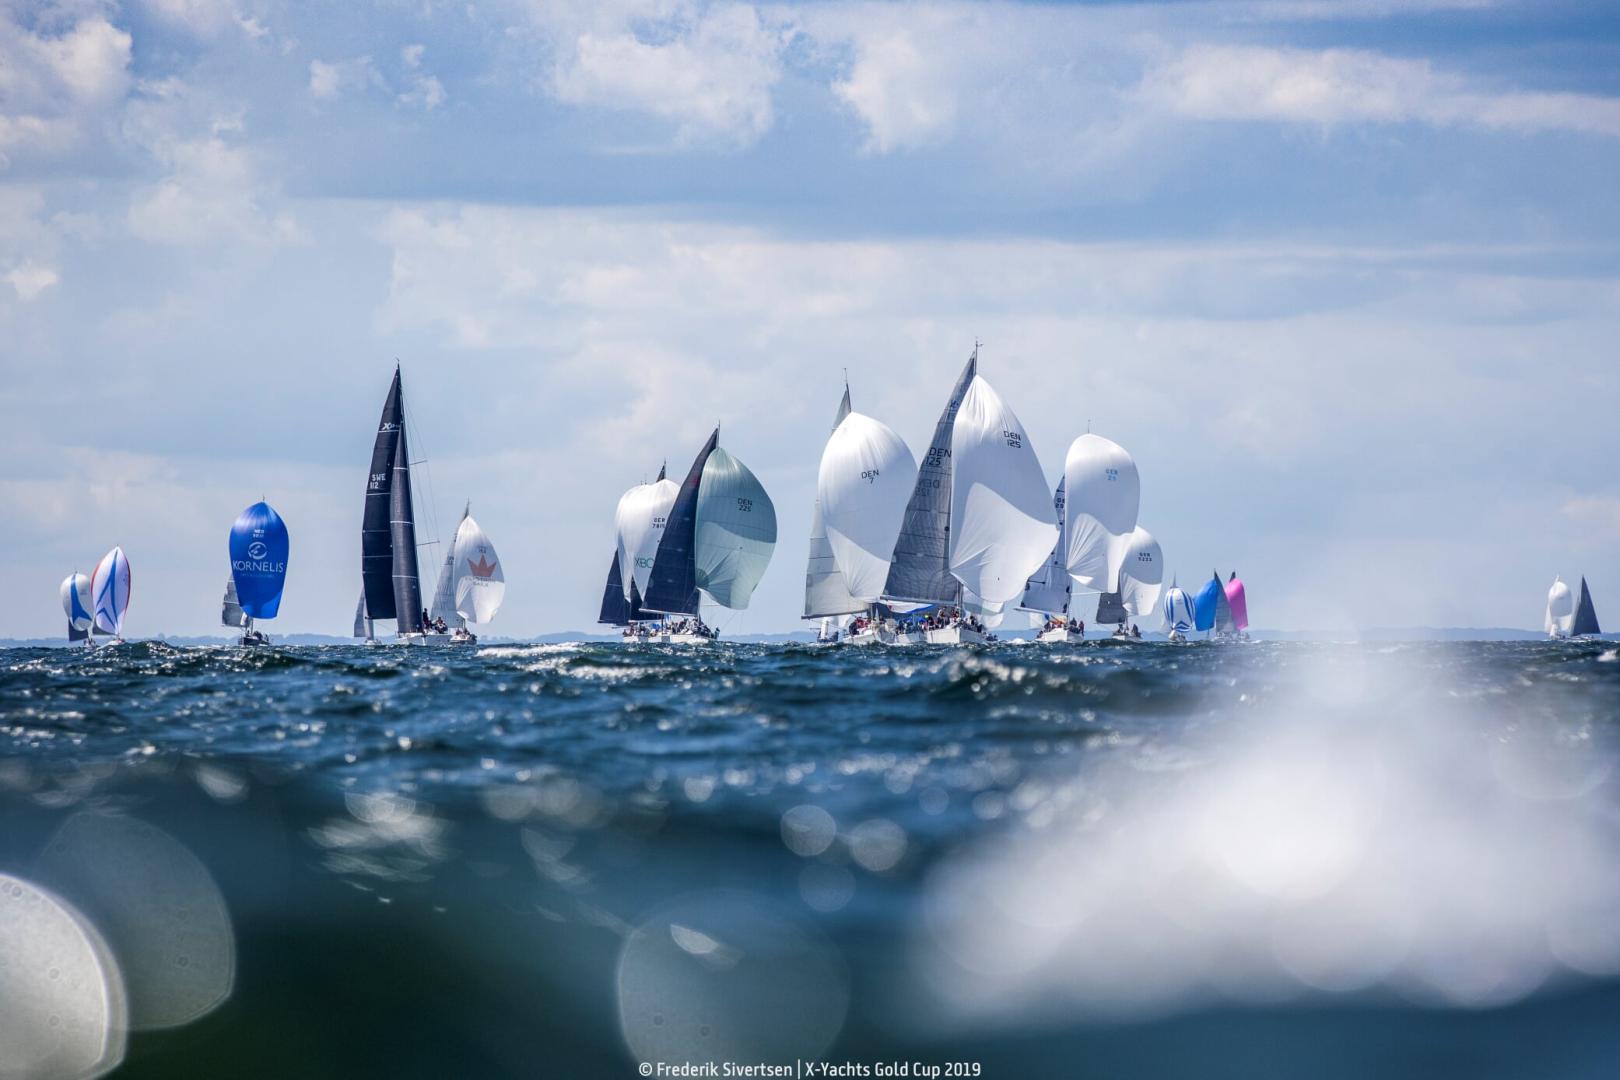 X-Yachts Gold Cup 2019